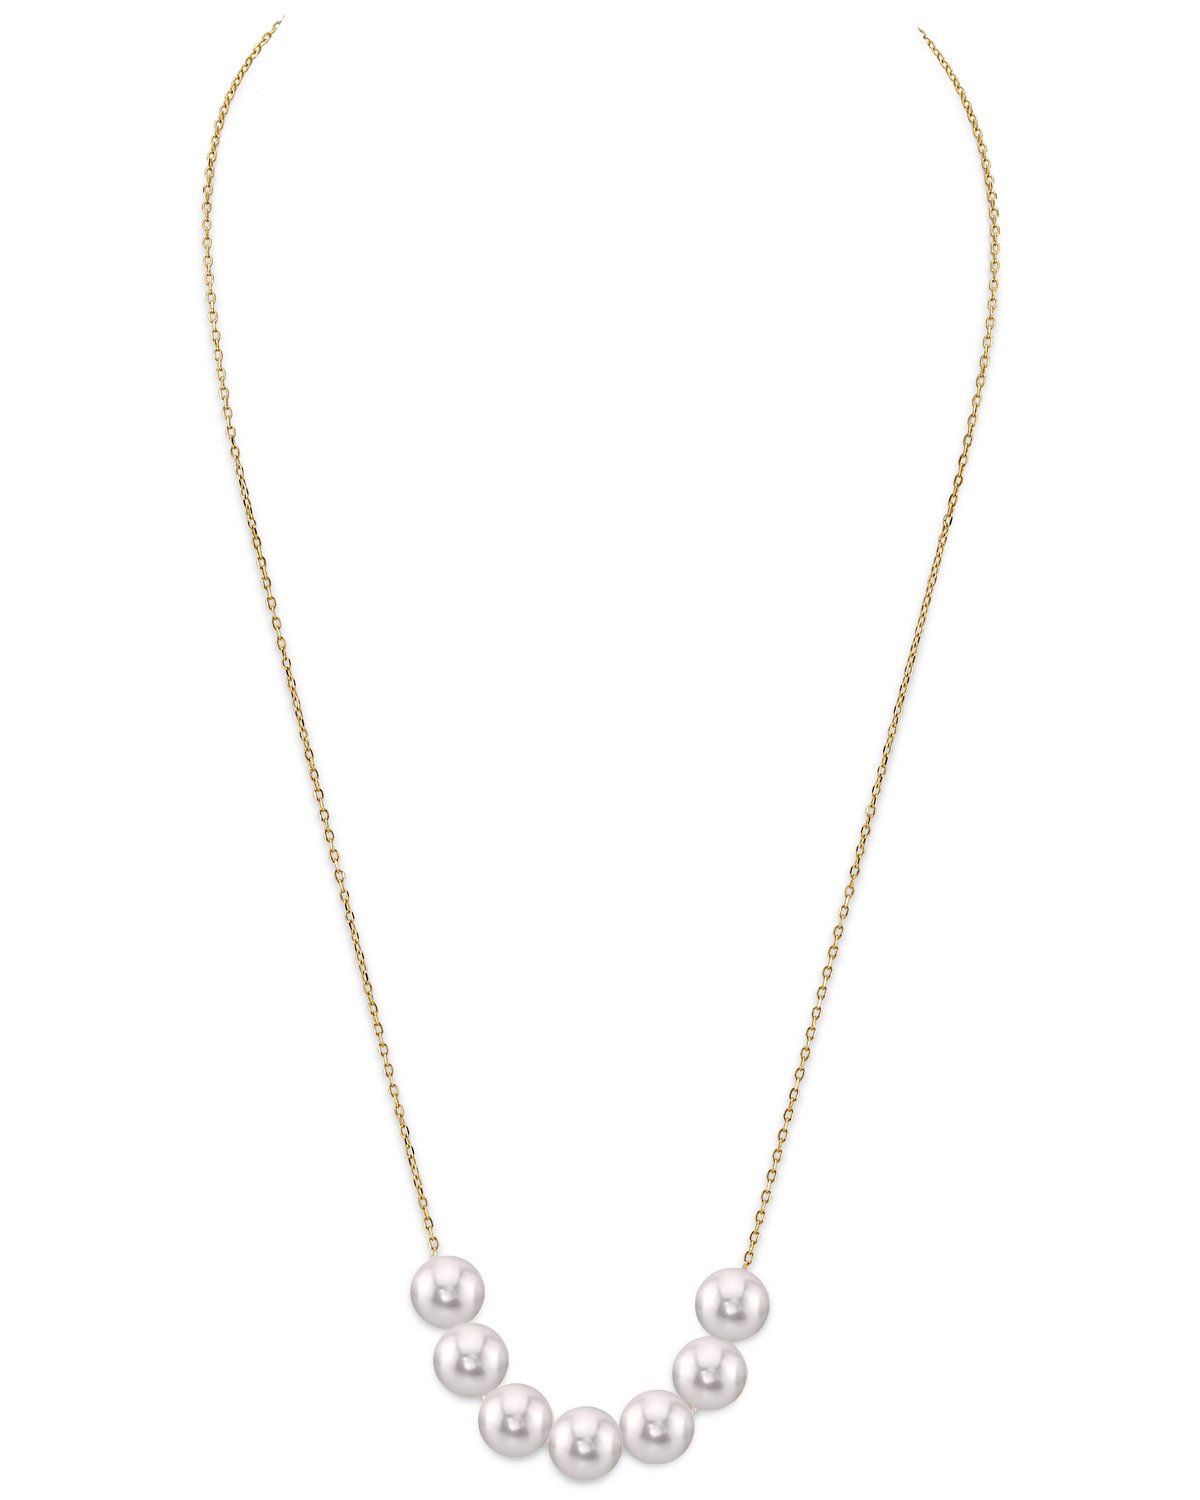 White Japanese Akoya Pearl Necklace, 7.0-7.5mm - AAA Quality